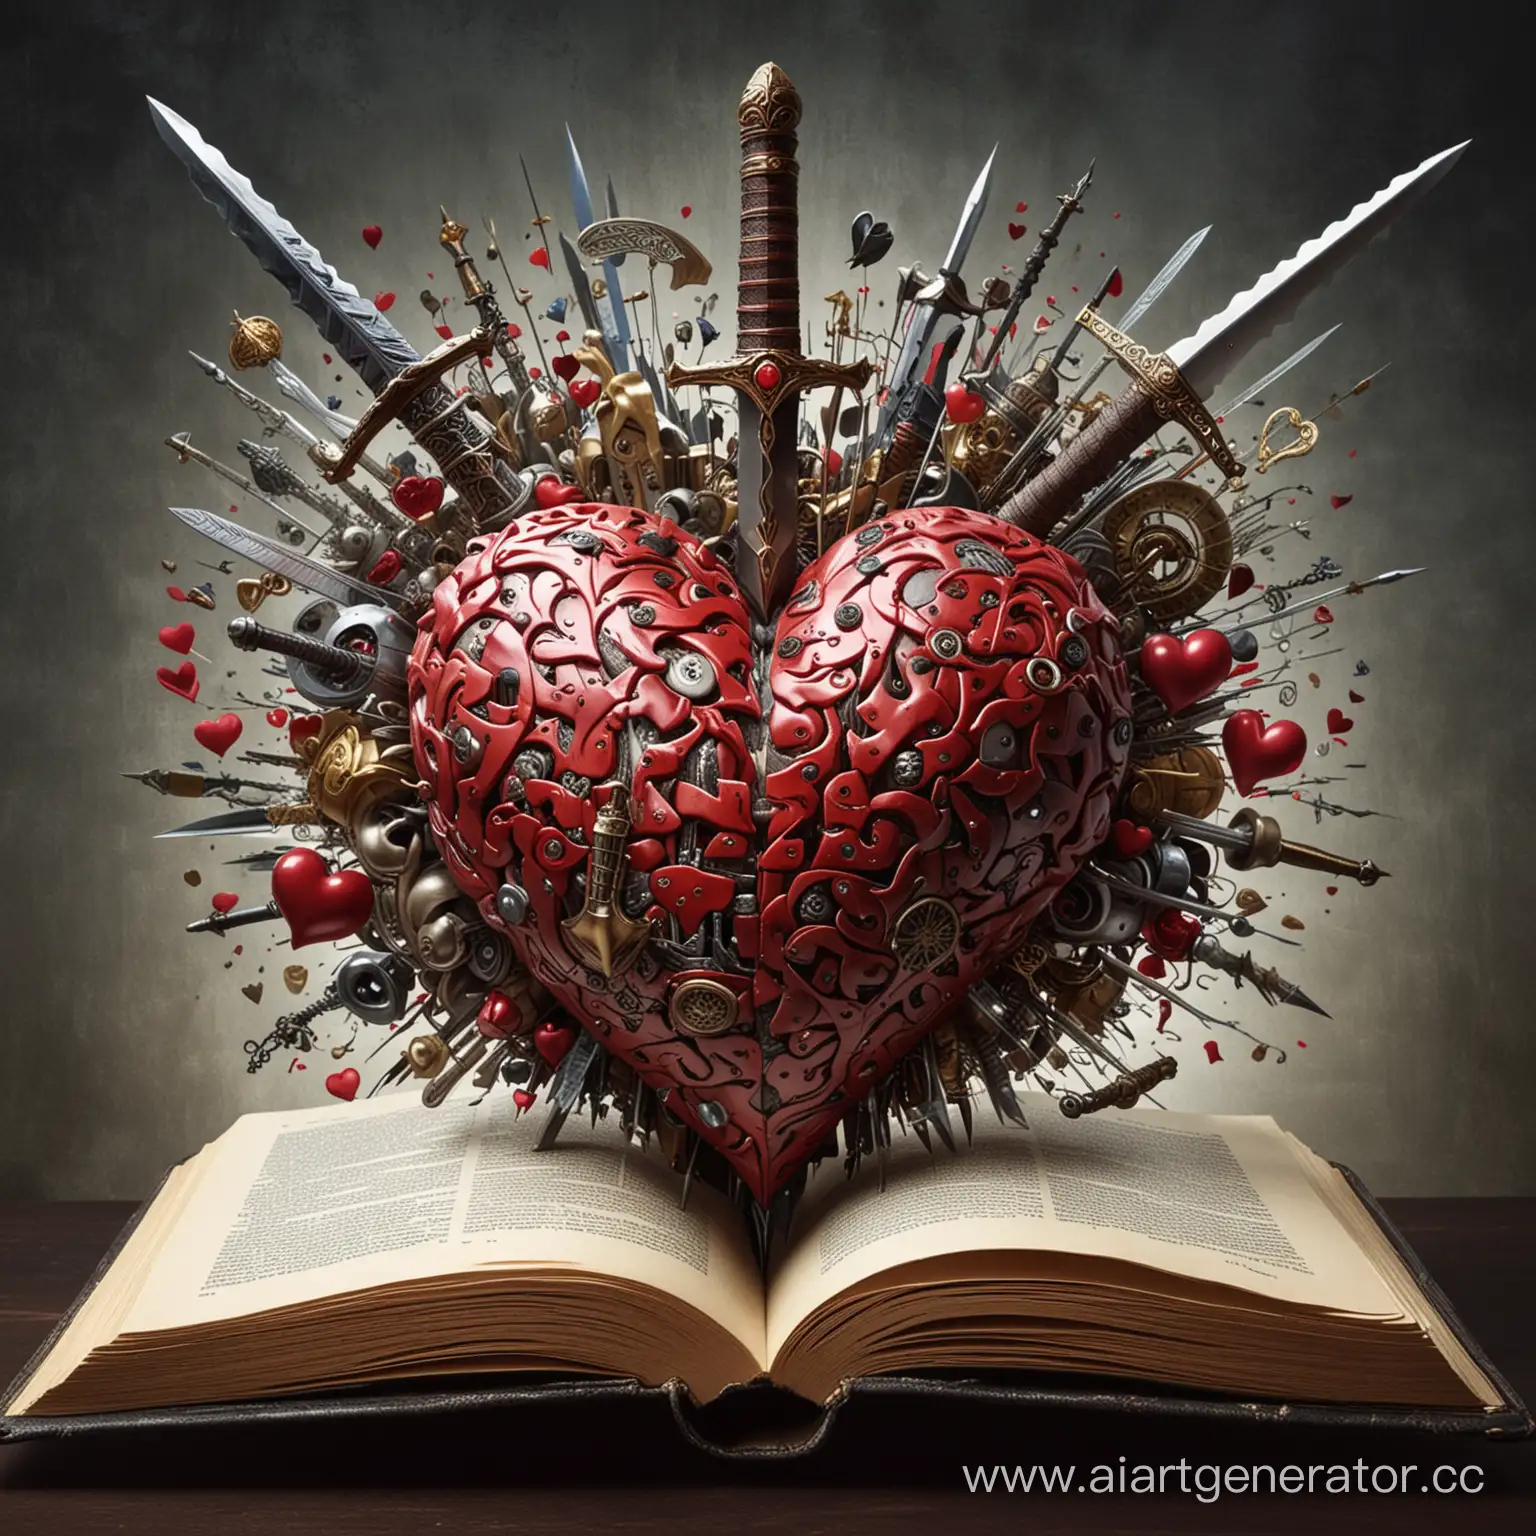 Fantasy-Book-of-Hearts-Swords-and-Brains-Illustrated-Genres